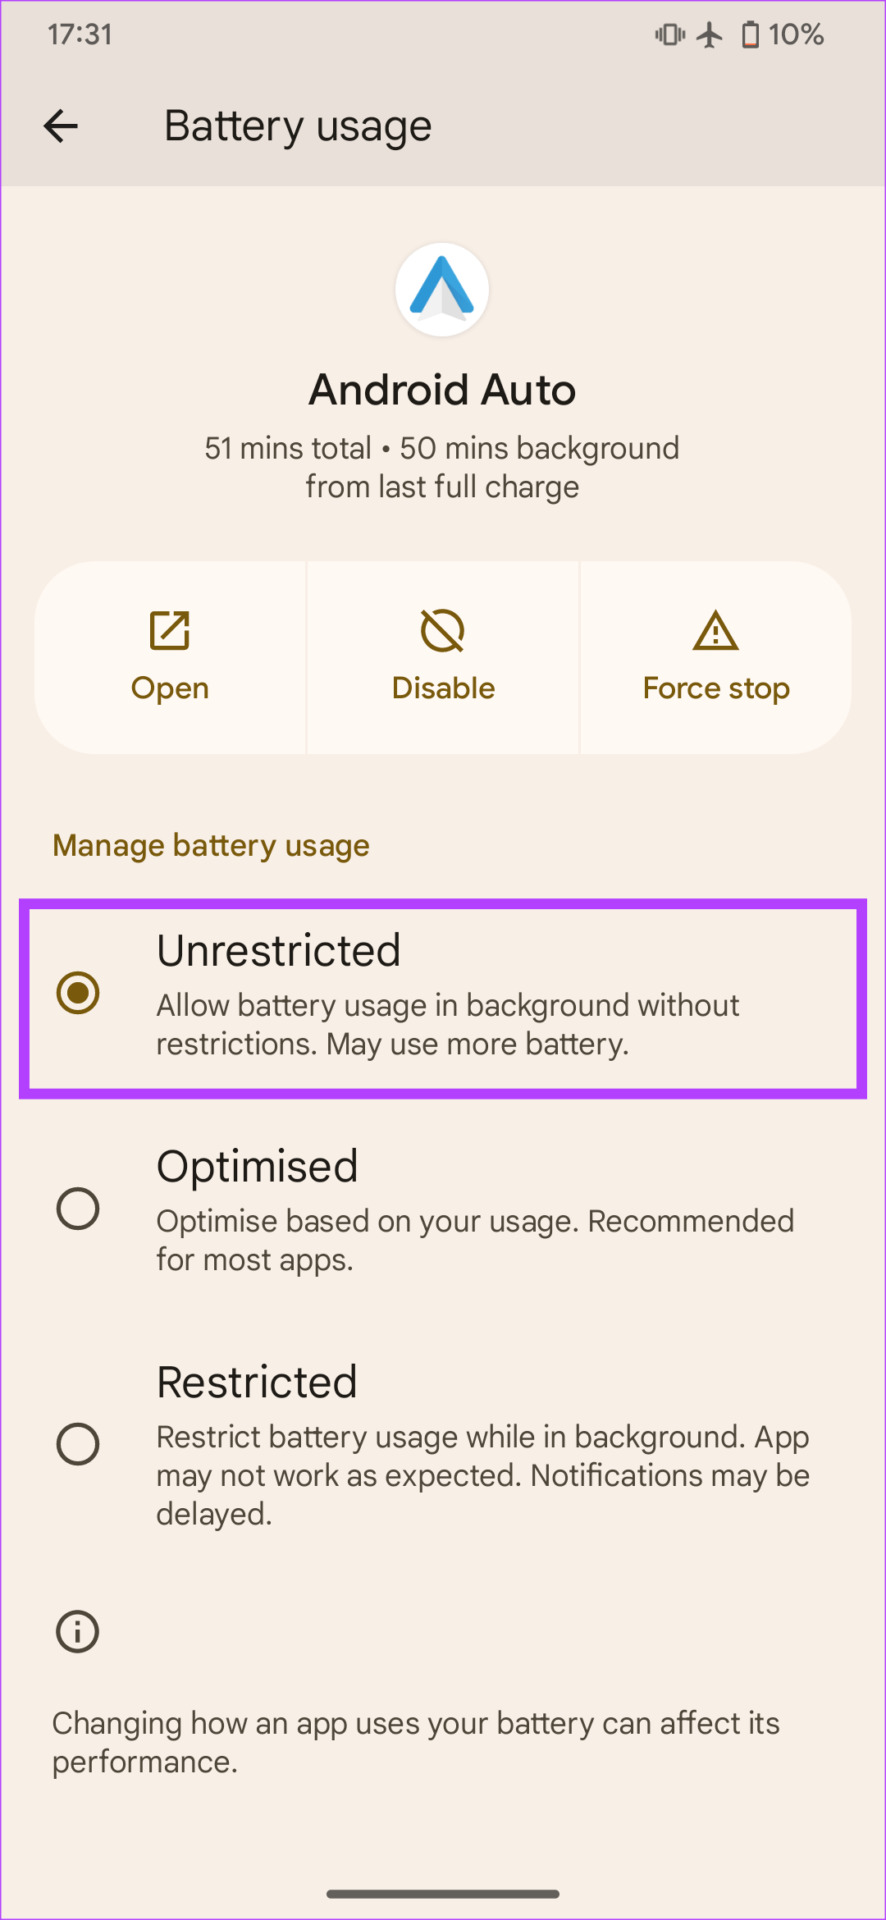 Unrestricted battery usage